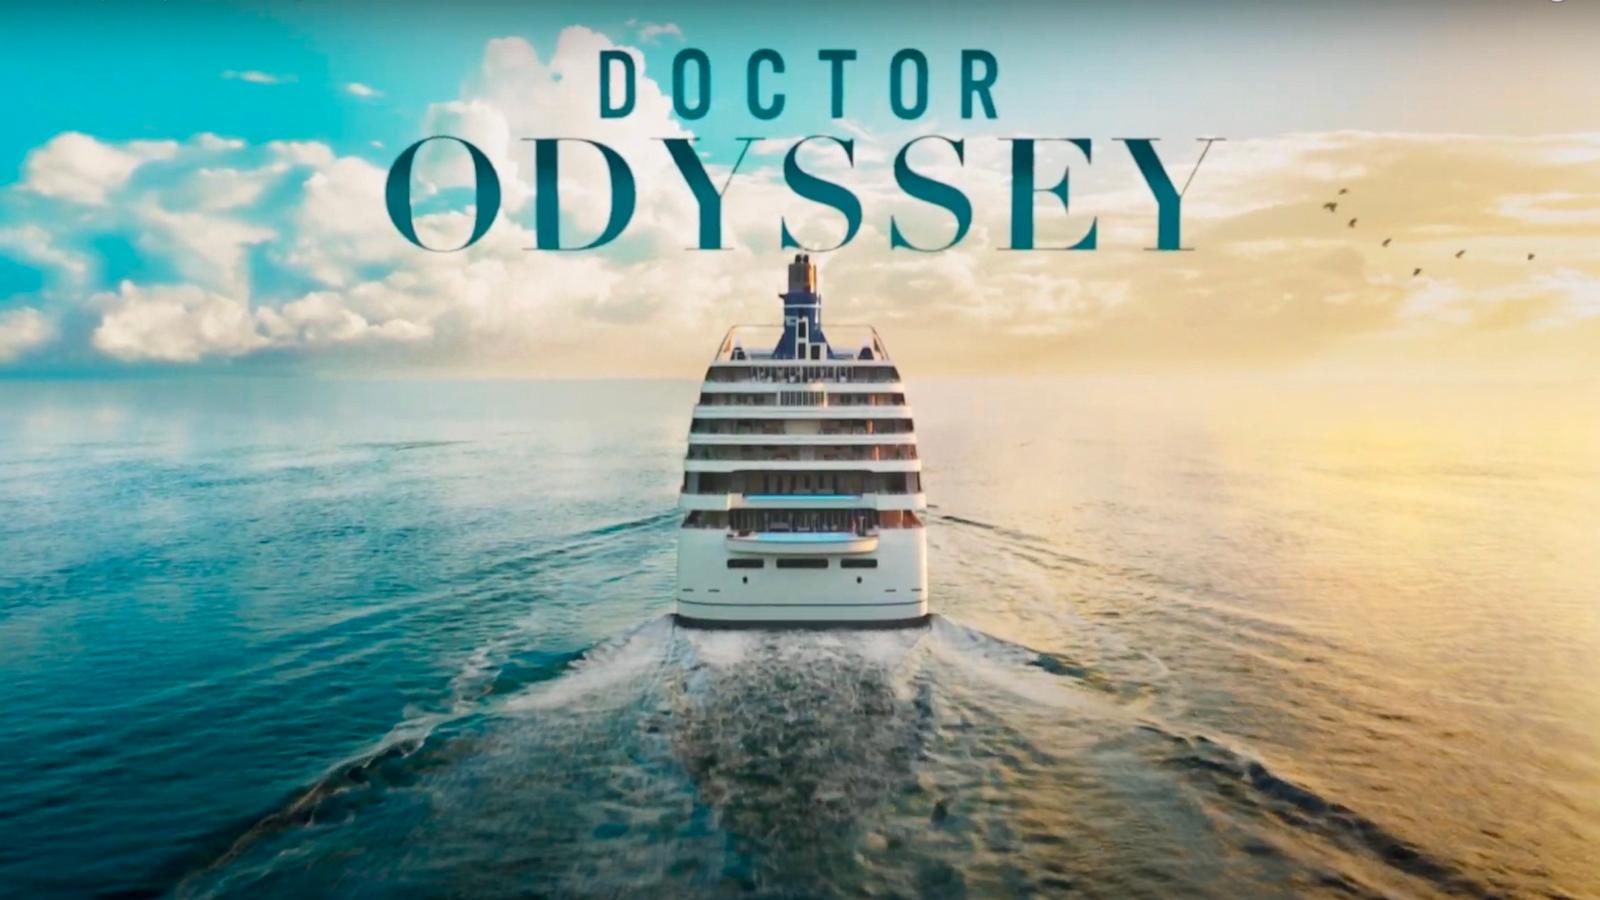 PHOTO: "Doctor Odyssey" will air Thursday nights on ABC.